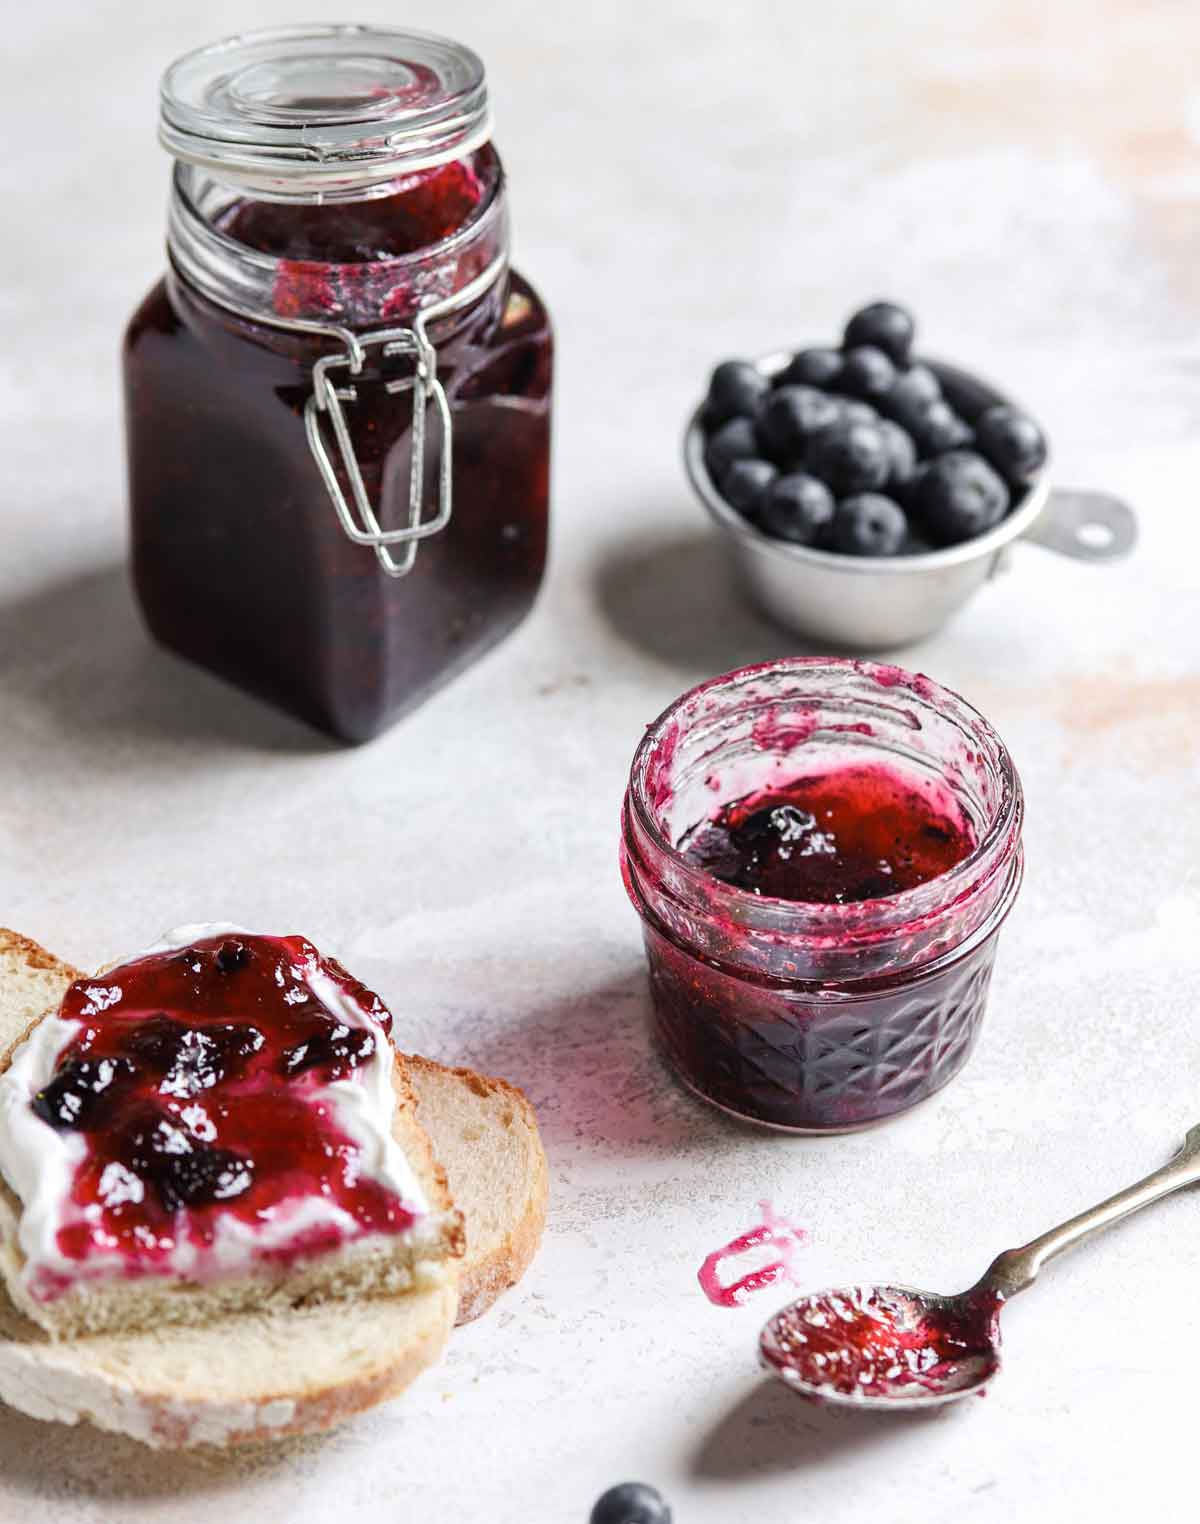 Jar of blueberry jam open with a dirty spoon, bowl of blueberries, and toast with cream cheese and jam around it.